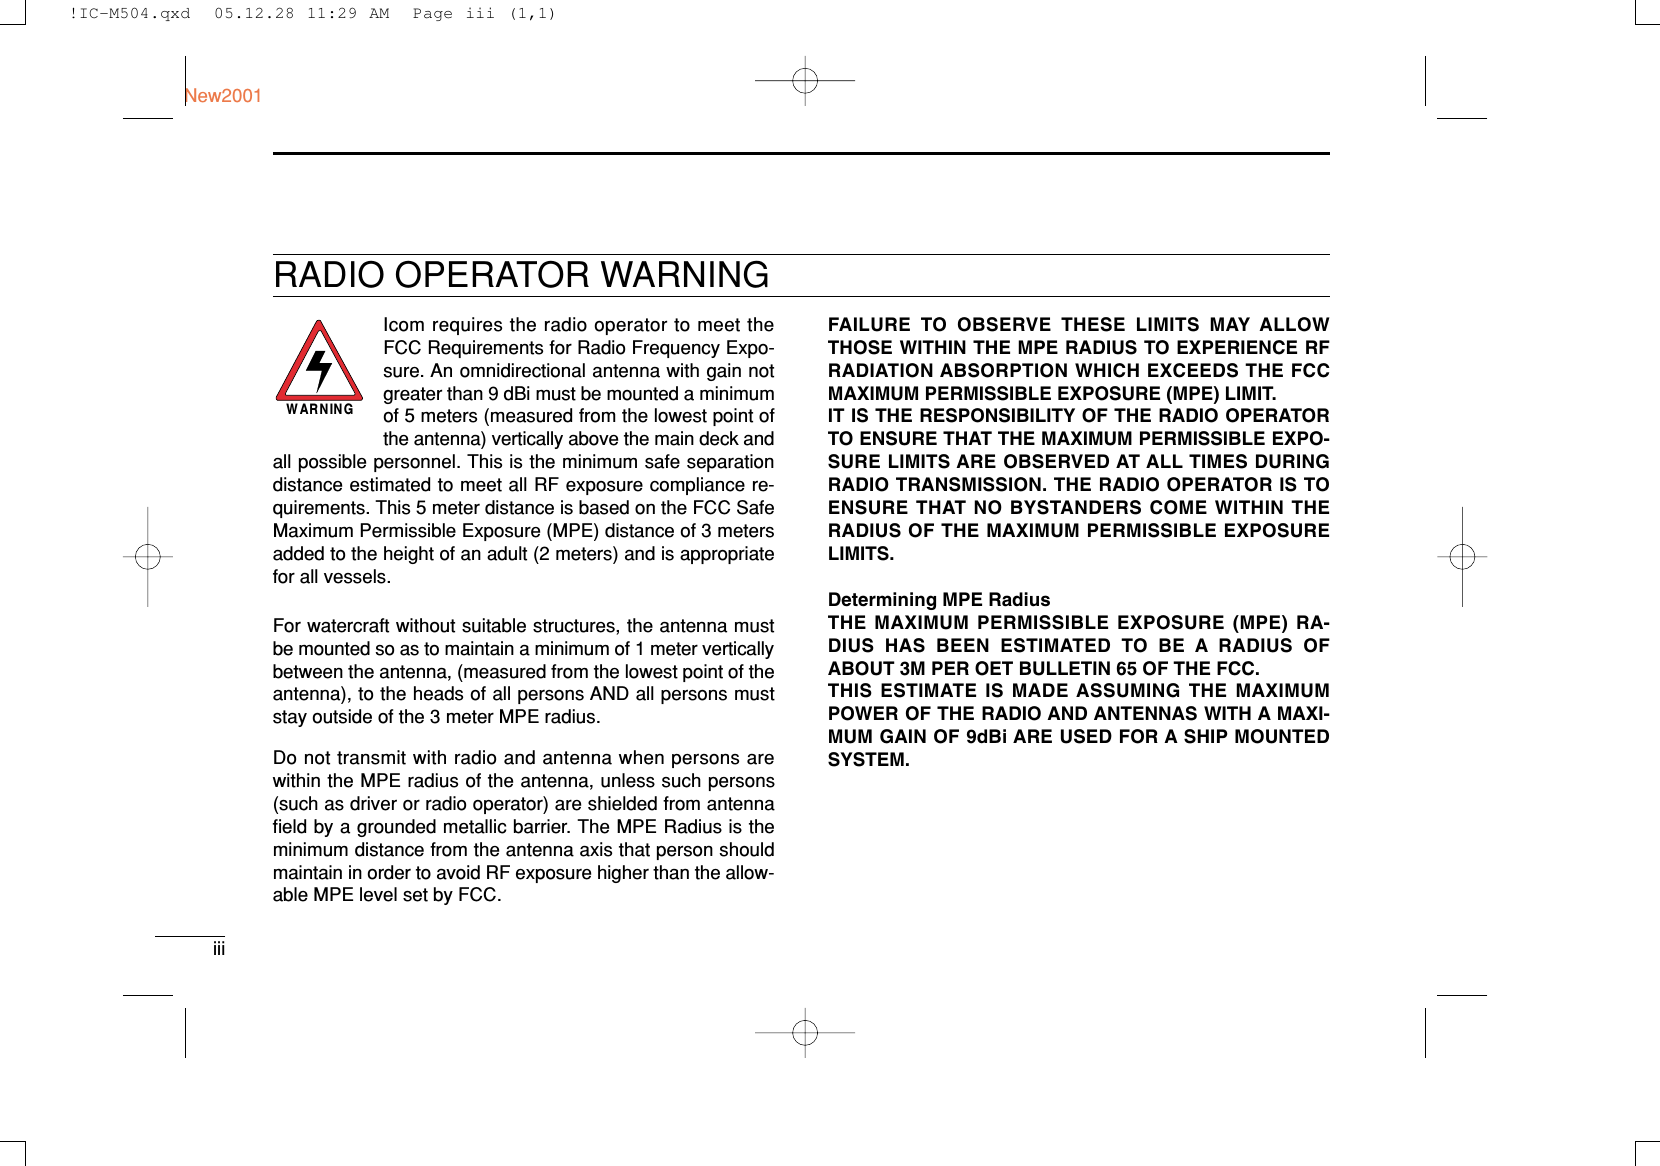 iiiNew2001RADIO OPERATOR WARNINGIcom requires the radio operator to meet theFCC Requirements for Radio Frequency Expo-sure. An omnidirectional antenna with gain notgreater than 9 dBi must be mounted a minimumof 5 meters (measured from the lowest point ofthe antenna) vertically above the main deck andall possible personnel. This is the minimum safe separationdistance estimated to meet all RF exposure compliance re-quirements. This 5 meter distance is based on the FCC SafeMaximum Permissible Exposure (MPE) distance of 3 metersadded to the height of an adult (2 meters) and is appropriatefor all vessels.For watercraft without suitable structures, the antenna mustbe mounted so as to maintain a minimum of 1 meter verticallybetween the antenna, (measured from the lowest point of theantenna), to the heads of all persons AND all persons muststay outside of the 3 meter MPE radius.Do not transmit with radio and antenna when persons arewithin the MPE radius of the antenna, unless such persons(such as driver or radio operator) are shielded from antennaﬁeld by a grounded metallic barrier. The MPE Radius is theminimum distance from the antenna axis that person shouldmaintain in order to avoid RF exposure higher than the allow-able MPE level set by FCC.WARNINGFAILURE TO OBSERVE THESE LIMITS MAY ALLOWTHOSE WITHIN THE MPE RADIUS TO EXPERIENCE RFRADIATION ABSORPTION WHICH EXCEEDS THE FCCMAXIMUM PERMISSIBLE EXPOSURE (MPE) LIMIT.IT IS THE RESPONSIBILITY OF THE RADIO OPERATORTO ENSURE THAT THE MAXIMUM PERMISSIBLE EXPO-SURE LIMITS ARE OBSERVED AT ALL TIMES DURINGRADIO TRANSMISSION. THE RADIO OPERATOR IS TOENSURE THAT NO BYSTANDERS COME WITHIN THERADIUS OF THE MAXIMUM PERMISSIBLE EXPOSURELIMITS.Determining MPE RadiusTHE MAXIMUM PERMISSIBLE EXPOSURE (MPE) RA-DIUS HAS BEEN ESTIMATED TO BE A RADIUS OFABOUT 3M PER OET BULLETIN 65 OF THE FCC.THIS ESTIMATE IS MADE ASSUMING THE MAXIMUMPOWER OF THE RADIO AND ANTENNAS WITH A MAXI-MUM GAIN OF 9dBi ARE USED FOR A SHIP MOUNTEDSYSTEM.!IC-M504.qxd  05.12.28 11:29 AM  Page iii (1,1)